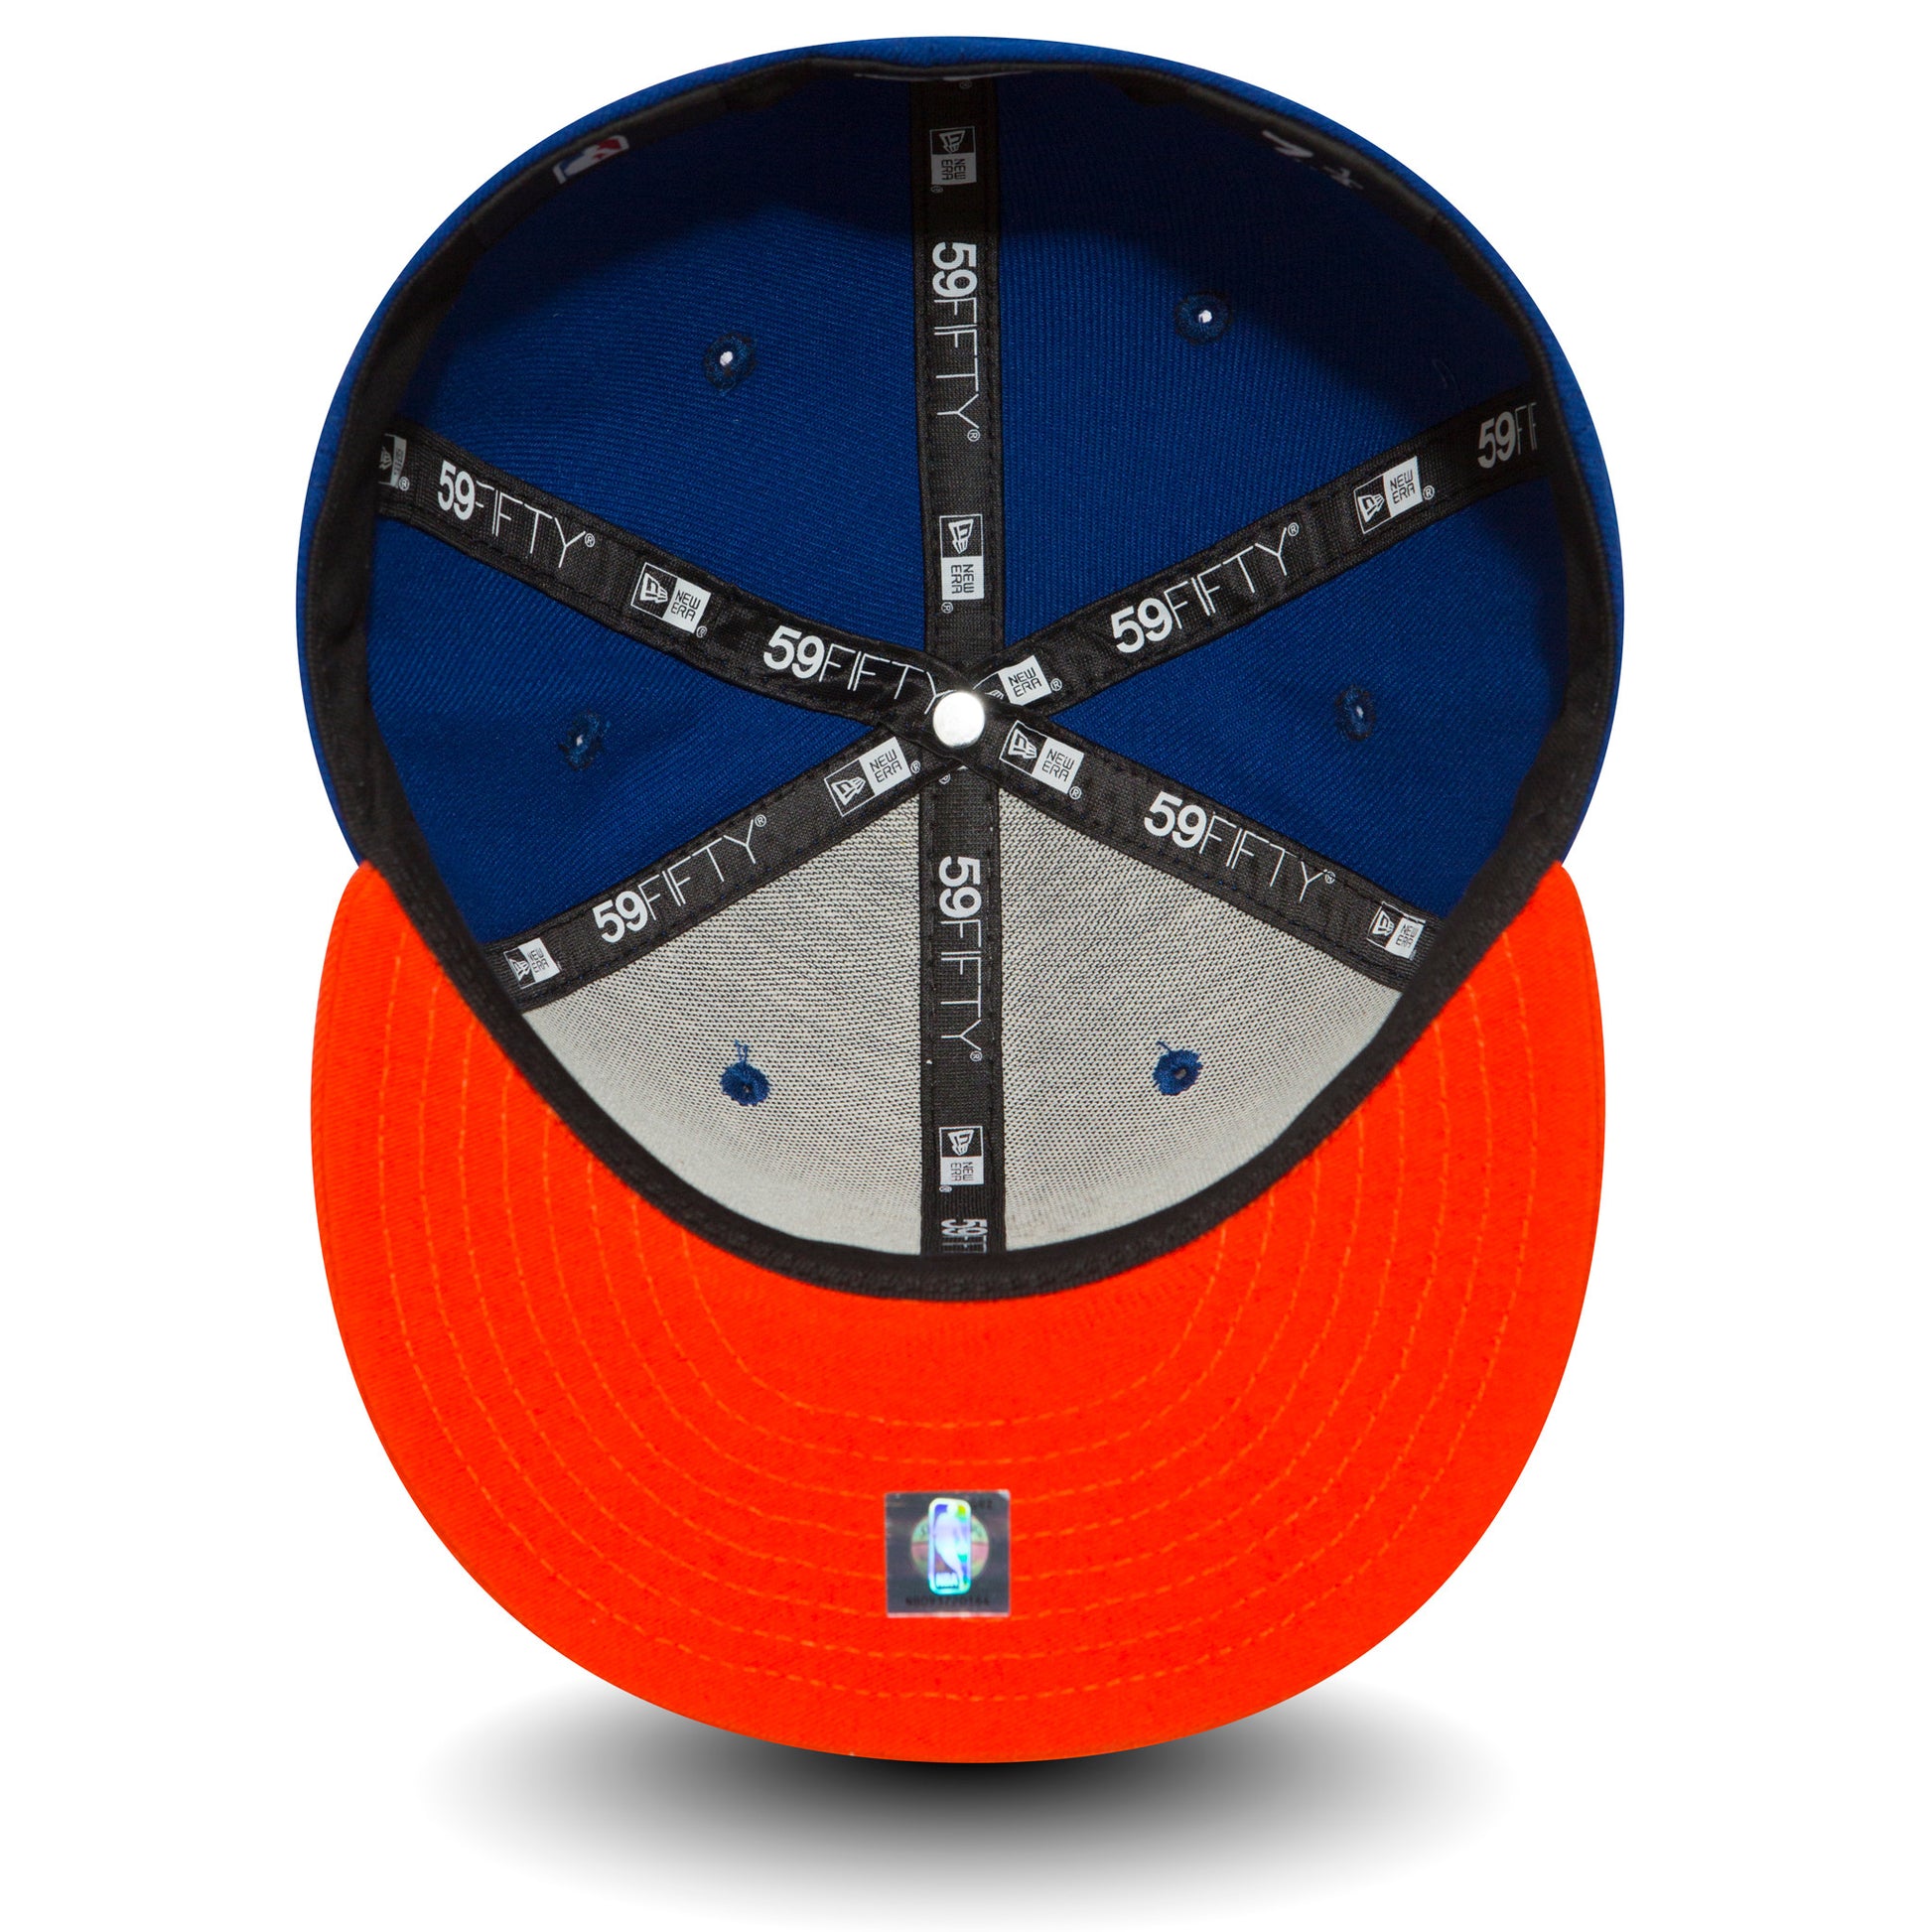 59Fifty Fitted Essential New York Knicks - Royal/Orange - Headz Up 